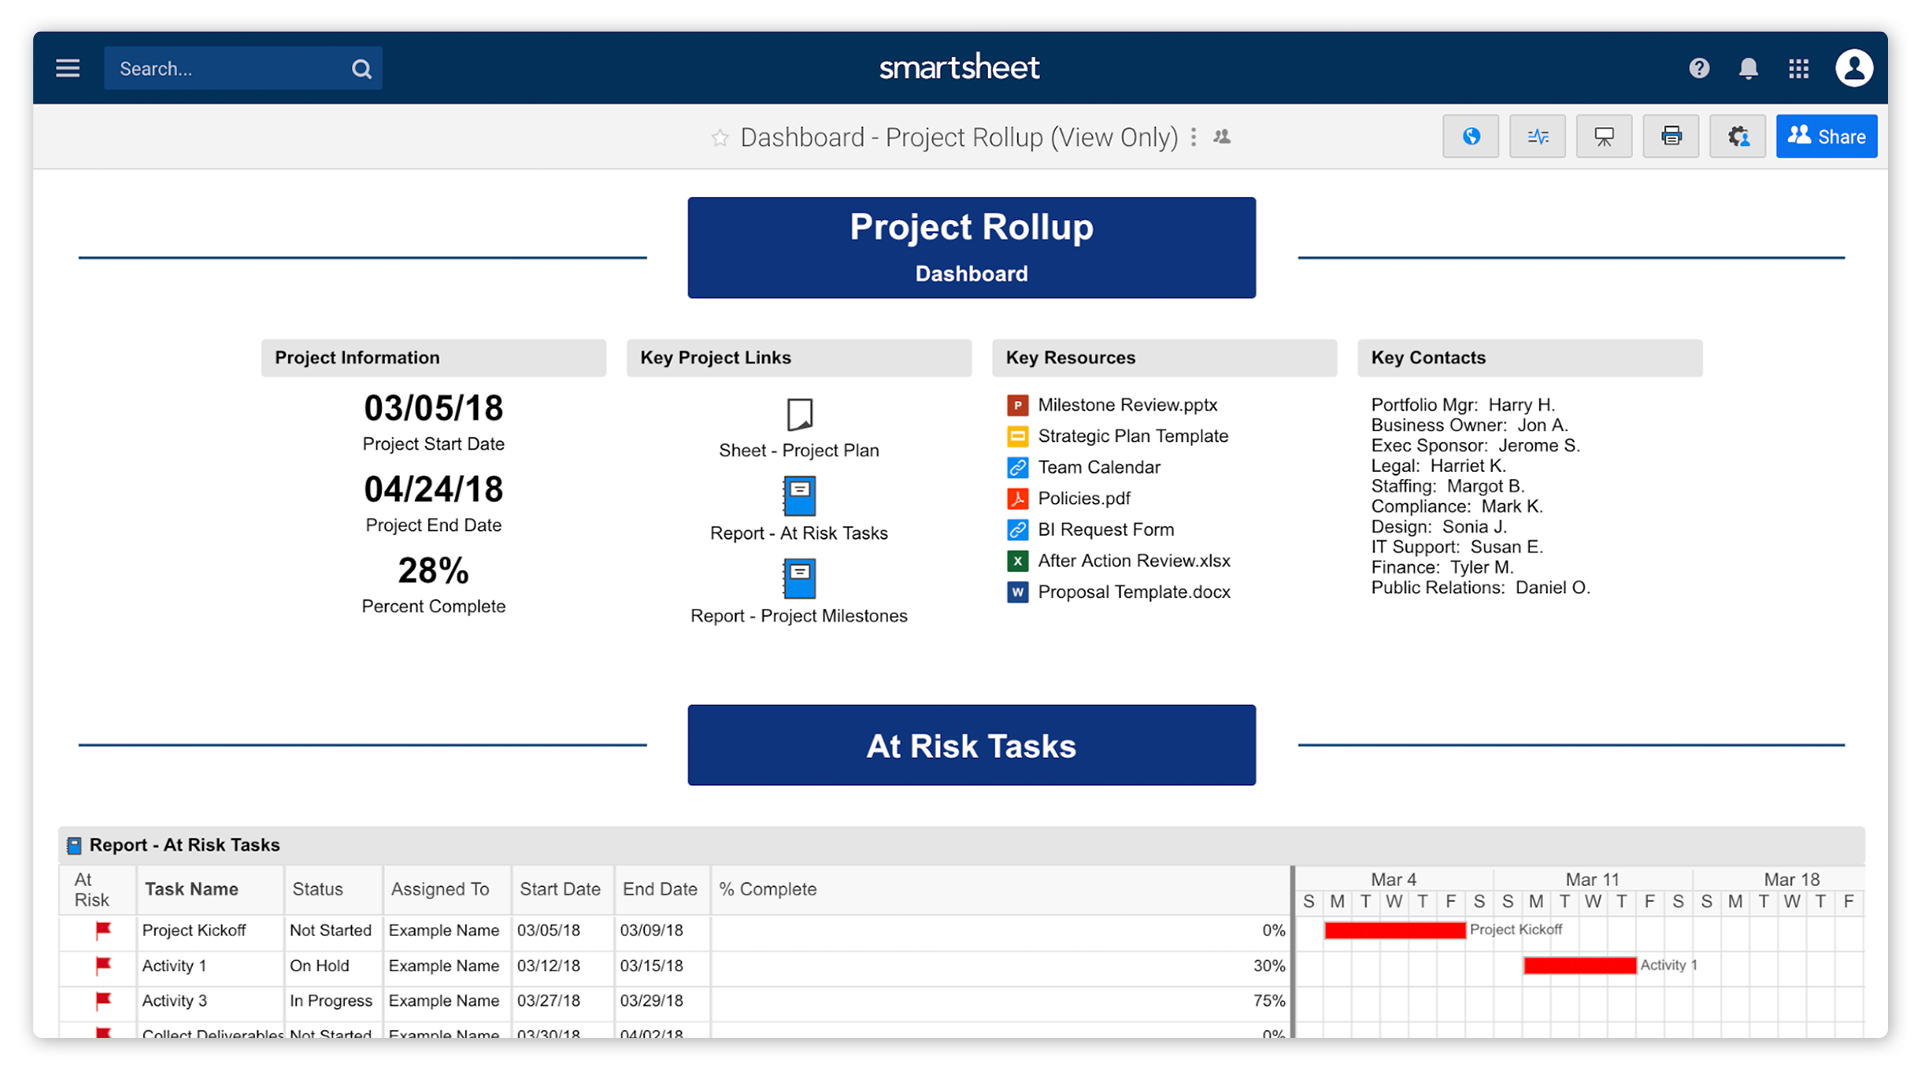 A Smartsheet dashboard illustrates project management capabilities, including key dates, links to resources, a contact list, and a Gantt chart schedule